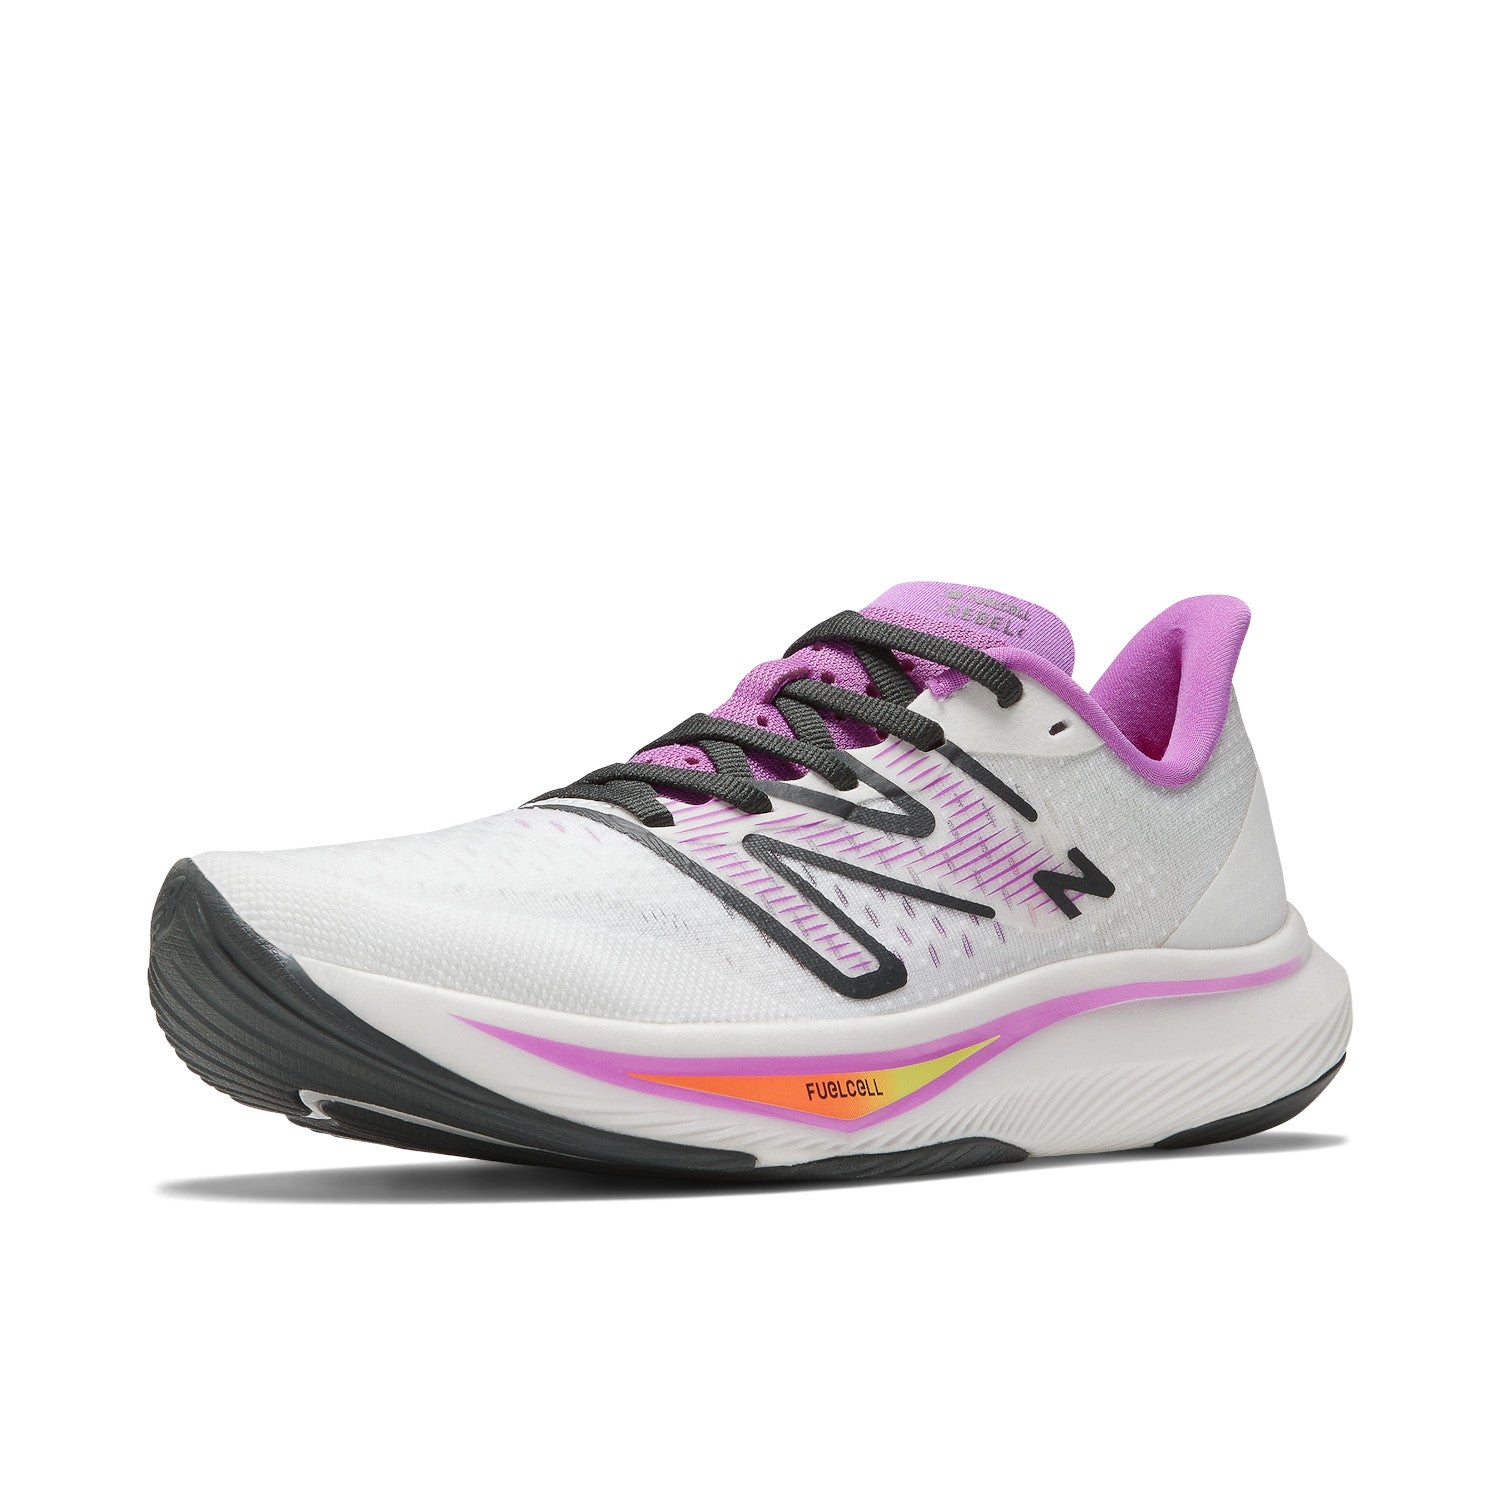 Women's New Balance FuelCell Rebel v3 Color: White with Cosmic Rose and Blacktop